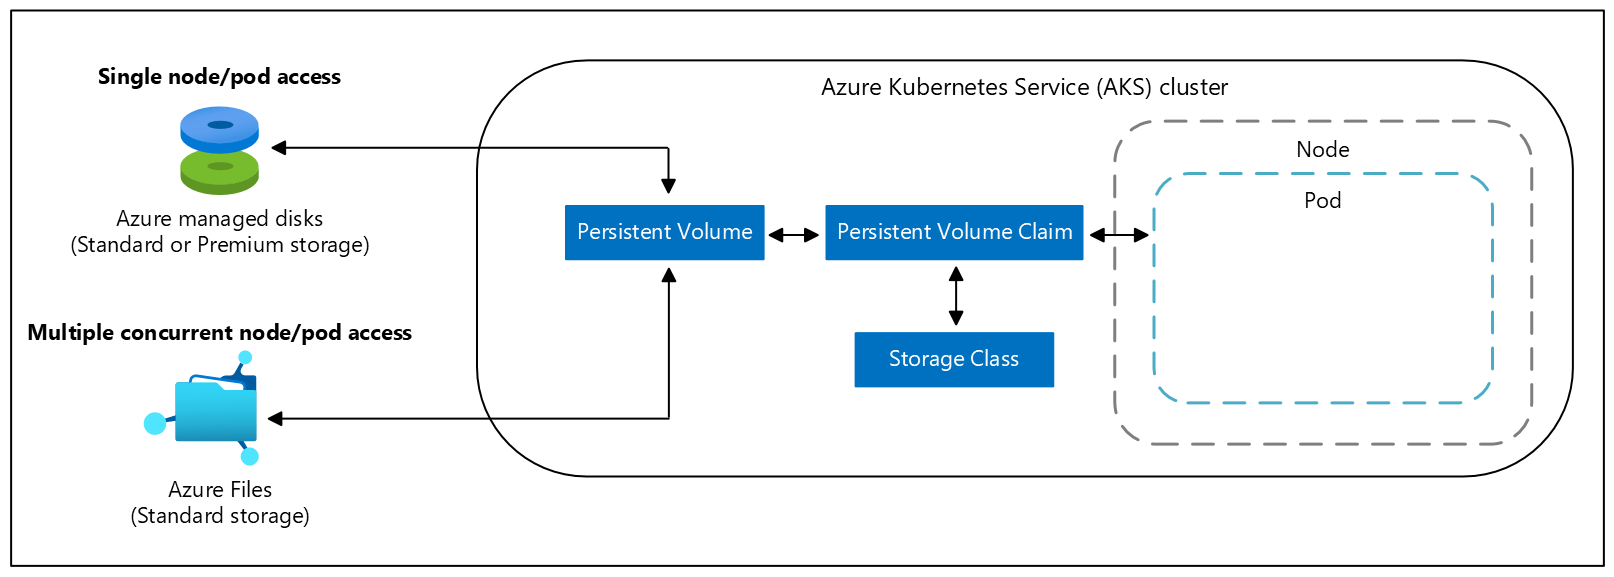 Diagram of persistent volume claims in an Azure Kubernetes Services (AKS) cluster.